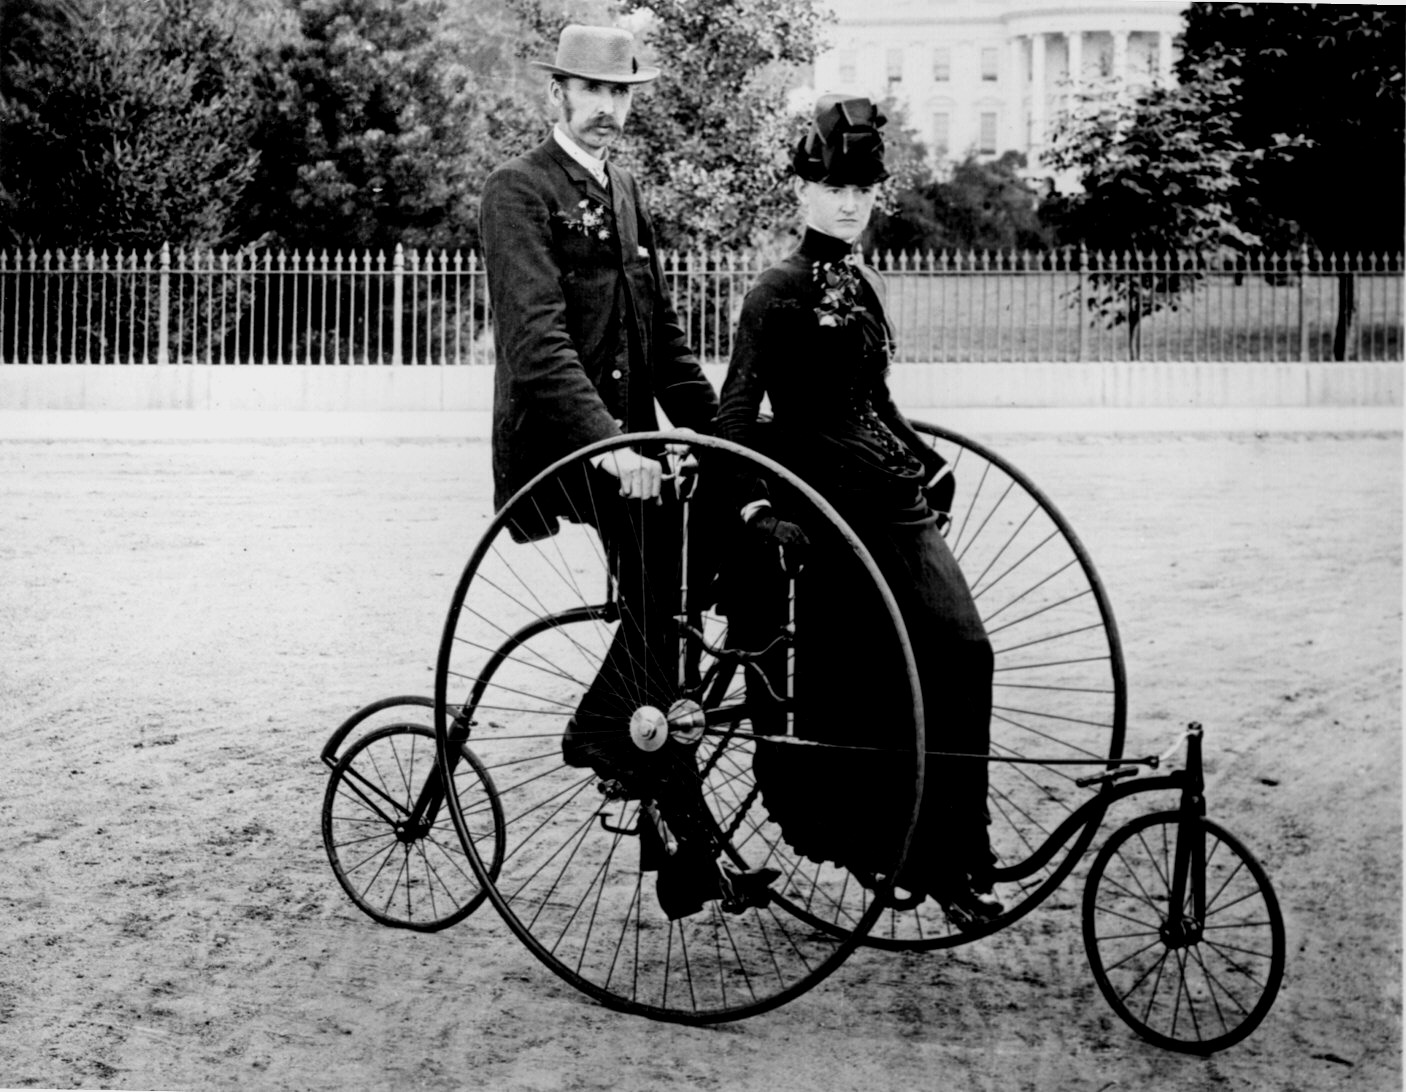 A Bicycle in 1880s